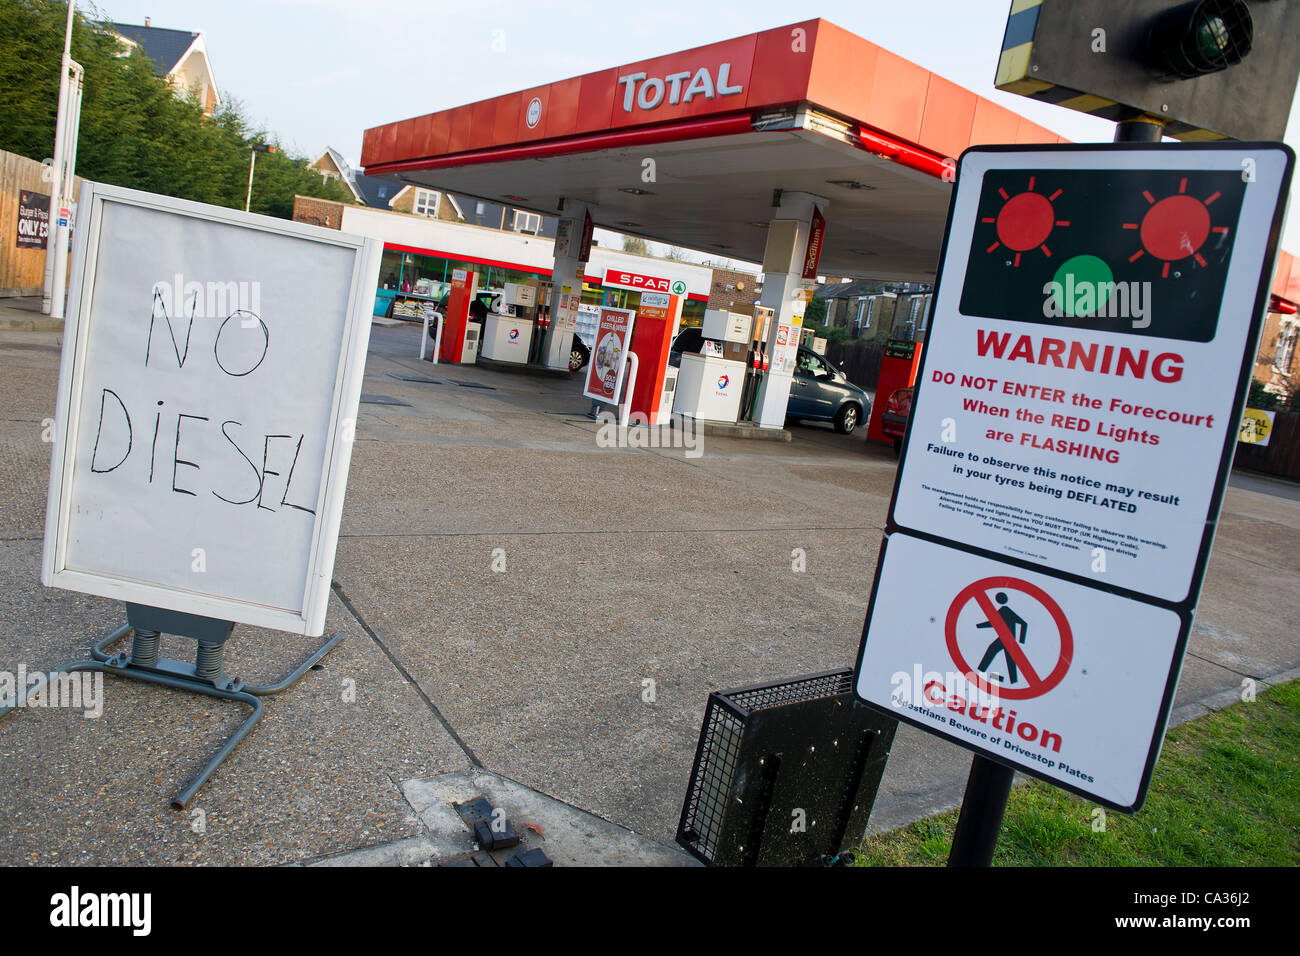 A petrol station runs out of diesel as commuters head home. Clapham, South West London, UK, Friday 30th March 2012. Stock Photo